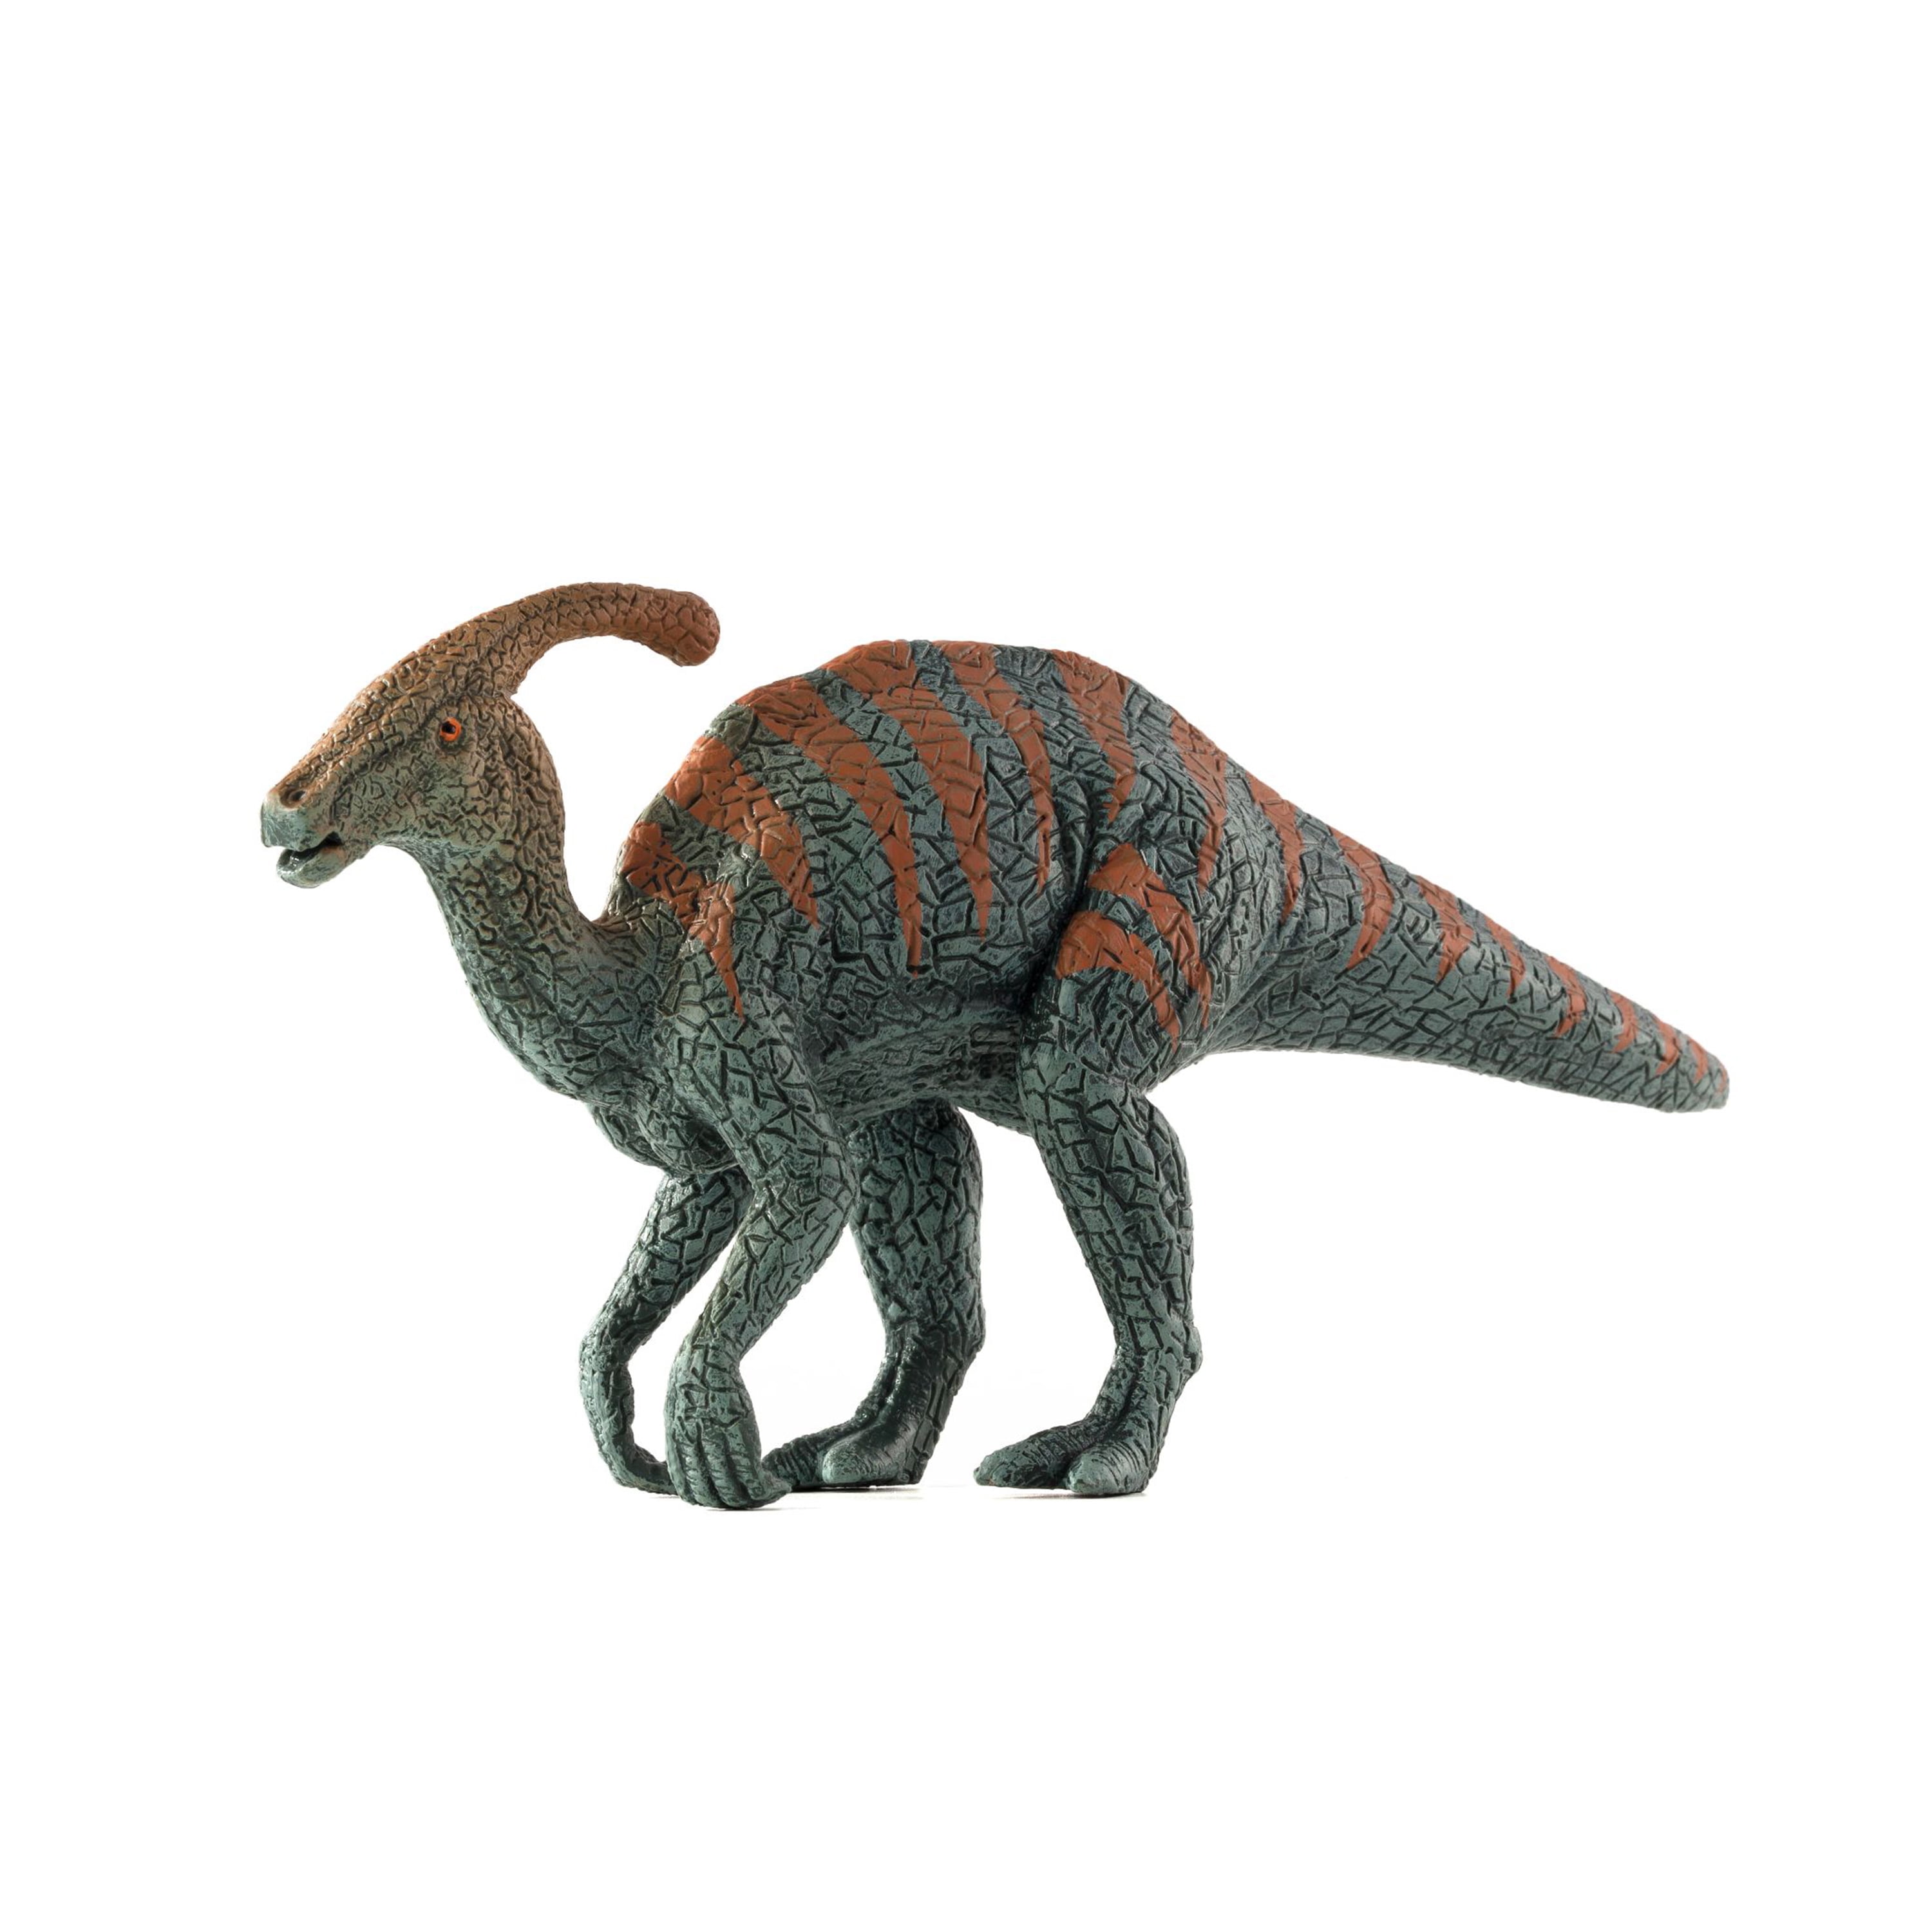 Realistic Dinosaurs Toys Parasaurolophus Model Figurine Collectibles Green 